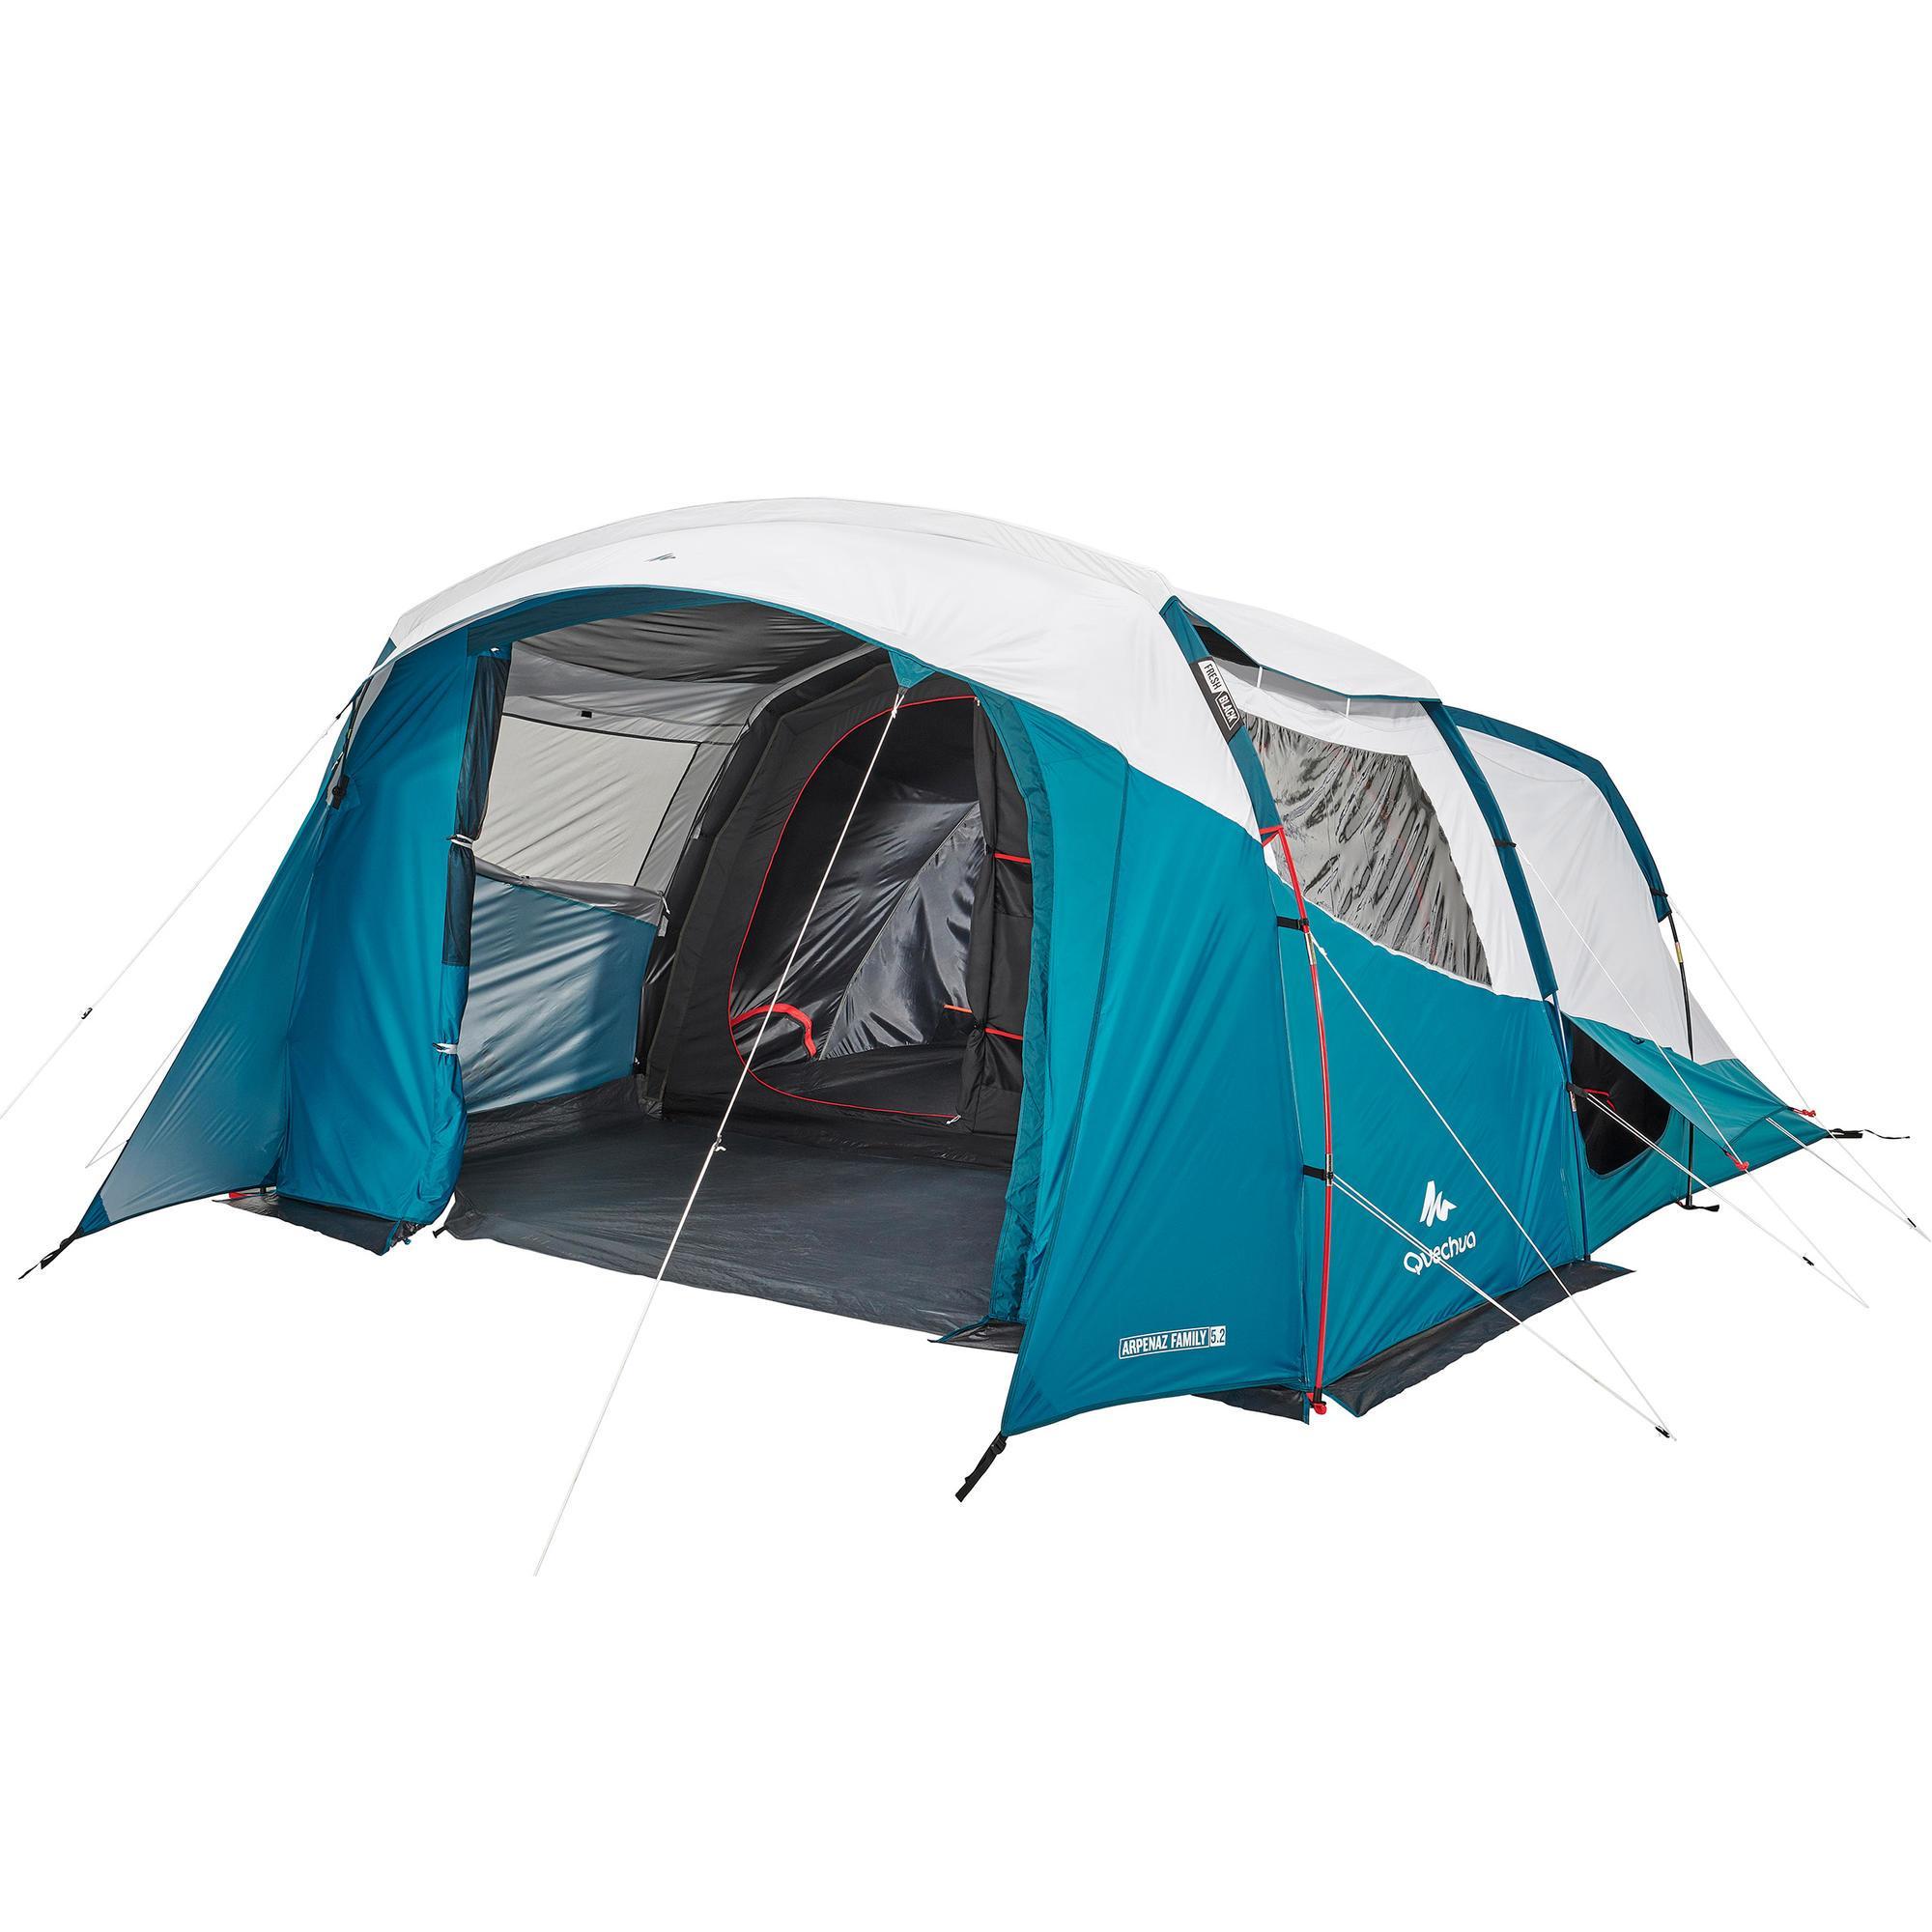 Camping tent with poles - Arpenaz 5.2 F 